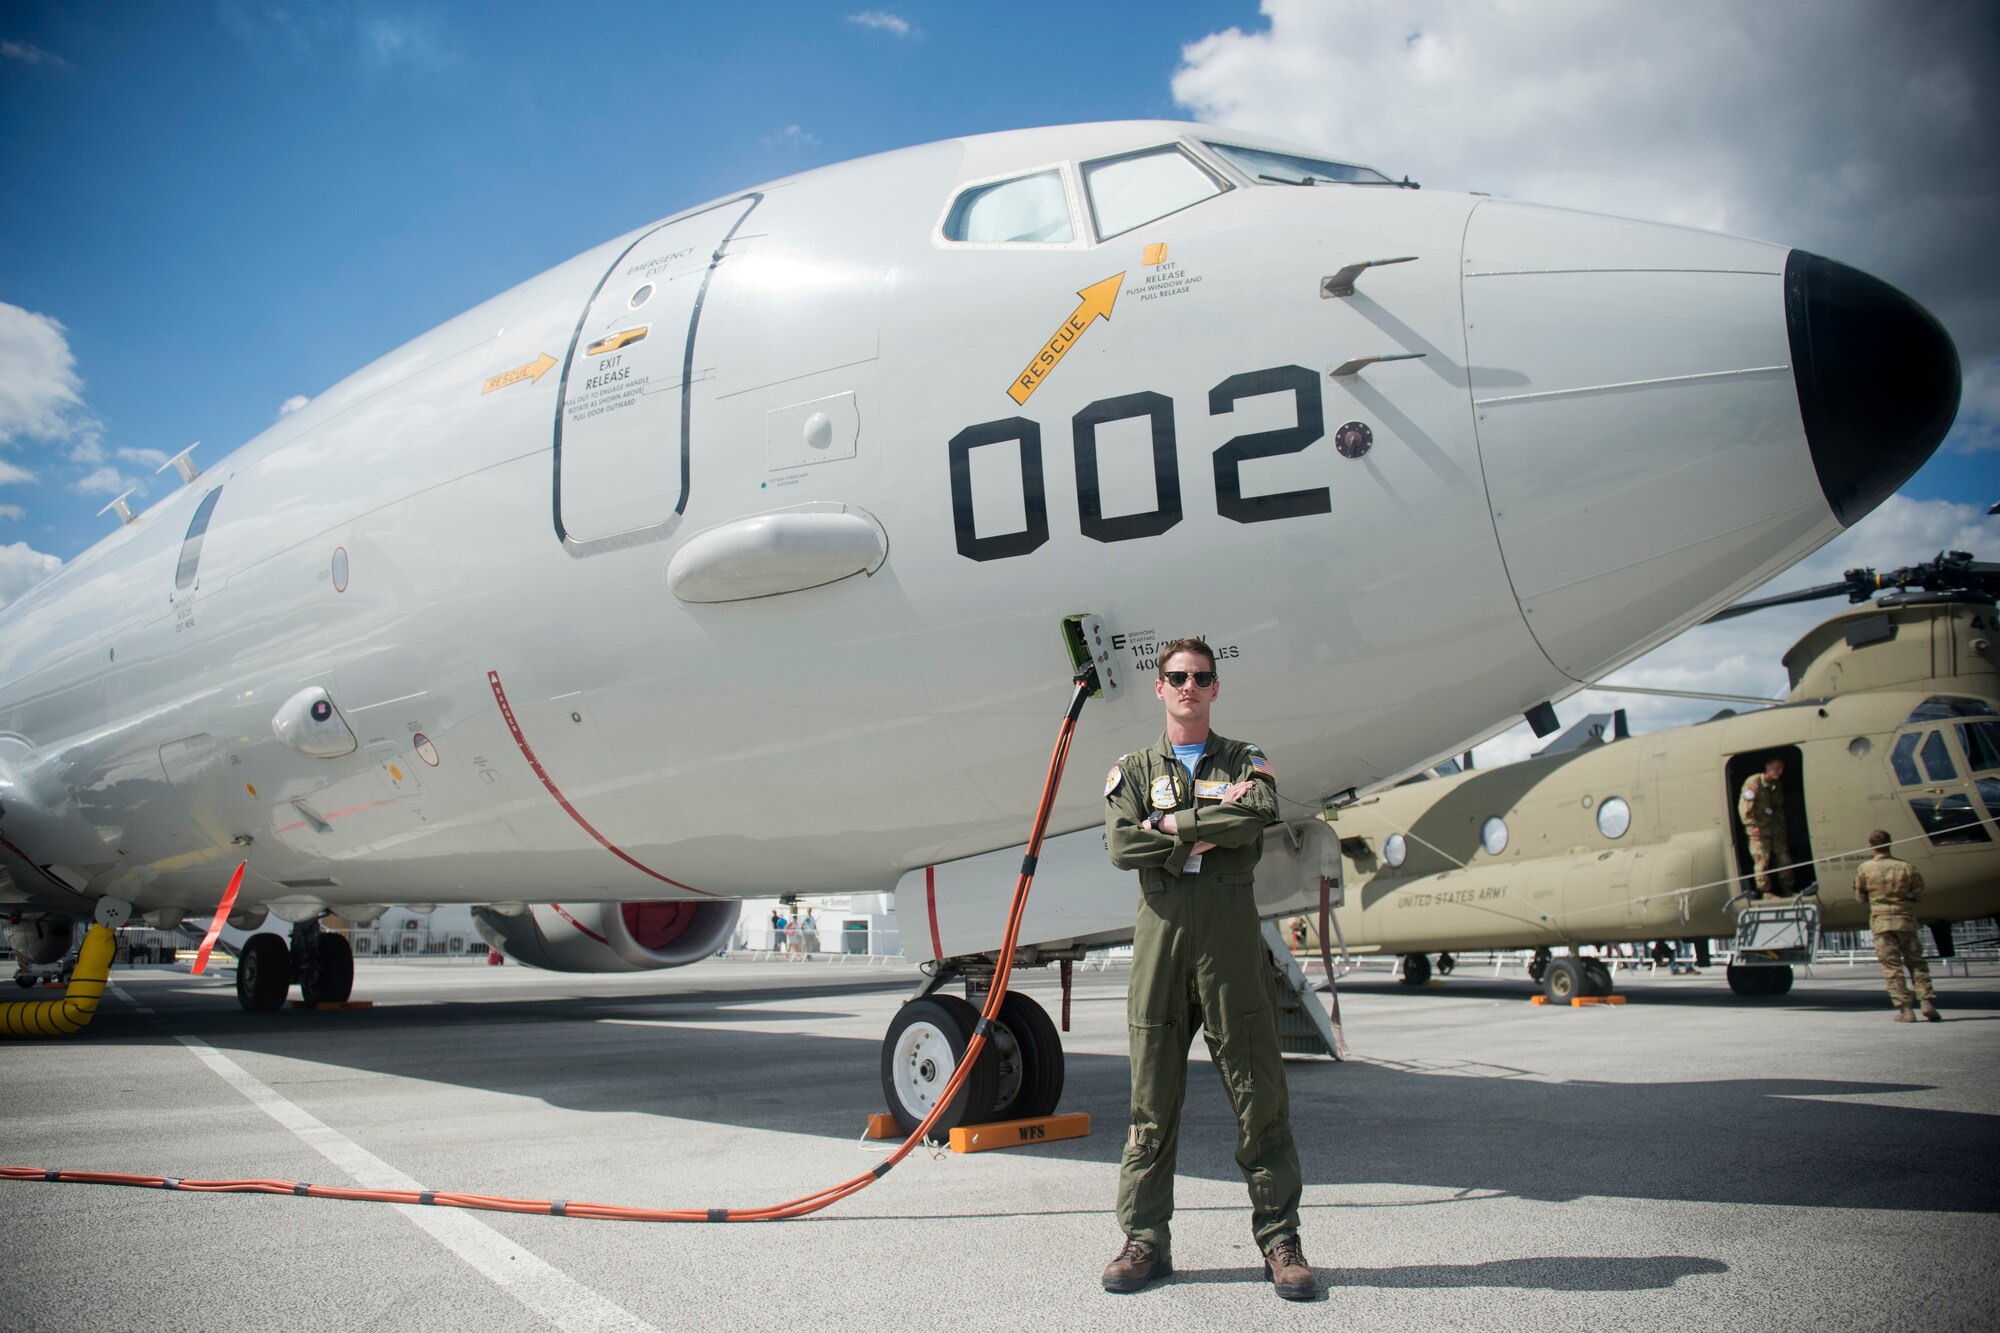 U.S. Navy Lt. Adam Anderson, a mission commander from Patrol Squadron 9, Combat Aircrew 3, stationed at Naval Air Station Whidbey Island, Wash., poses for a photo in front of a P-8A Poseidon from his unit at the Paris Air Show, June 21, 2019. Anderson was one of approximately 130 U.S. military aircrew and support personnel from bases in Europe and the U.S. who participated in the air show. (U.S. Air Force photo by Master Sgt. Eric Burks)